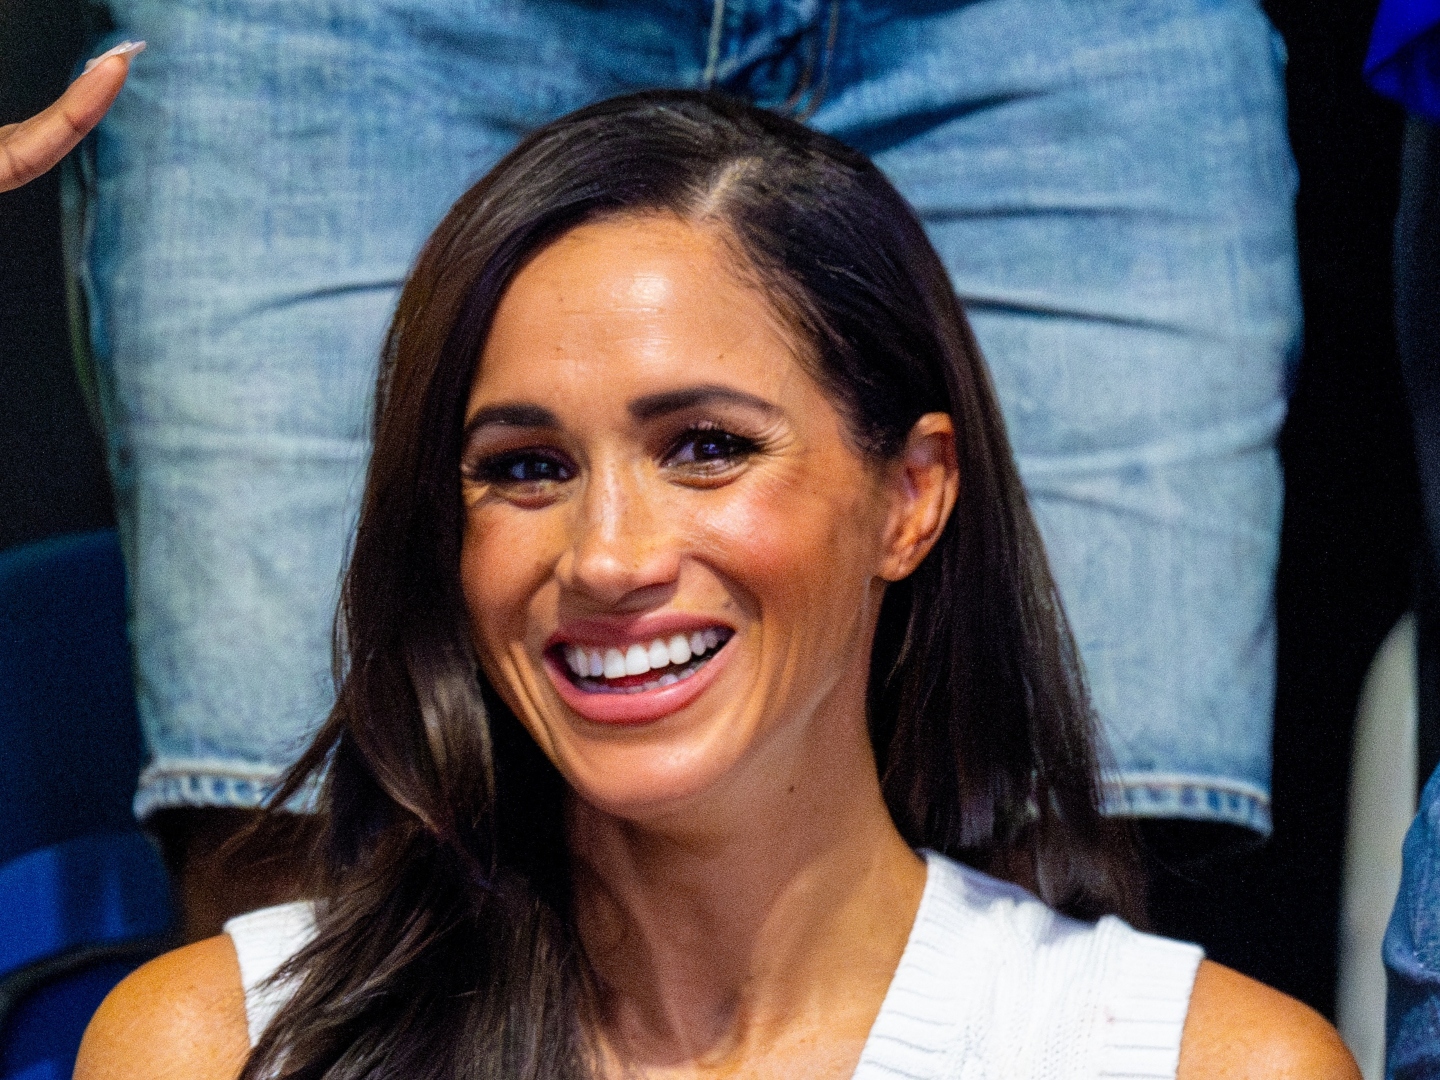 Meghan Markle, Duchess of Sussex during day 5 of Invictus Games 2023 at the Merkur Spiel-Arena in Dusseldorf.